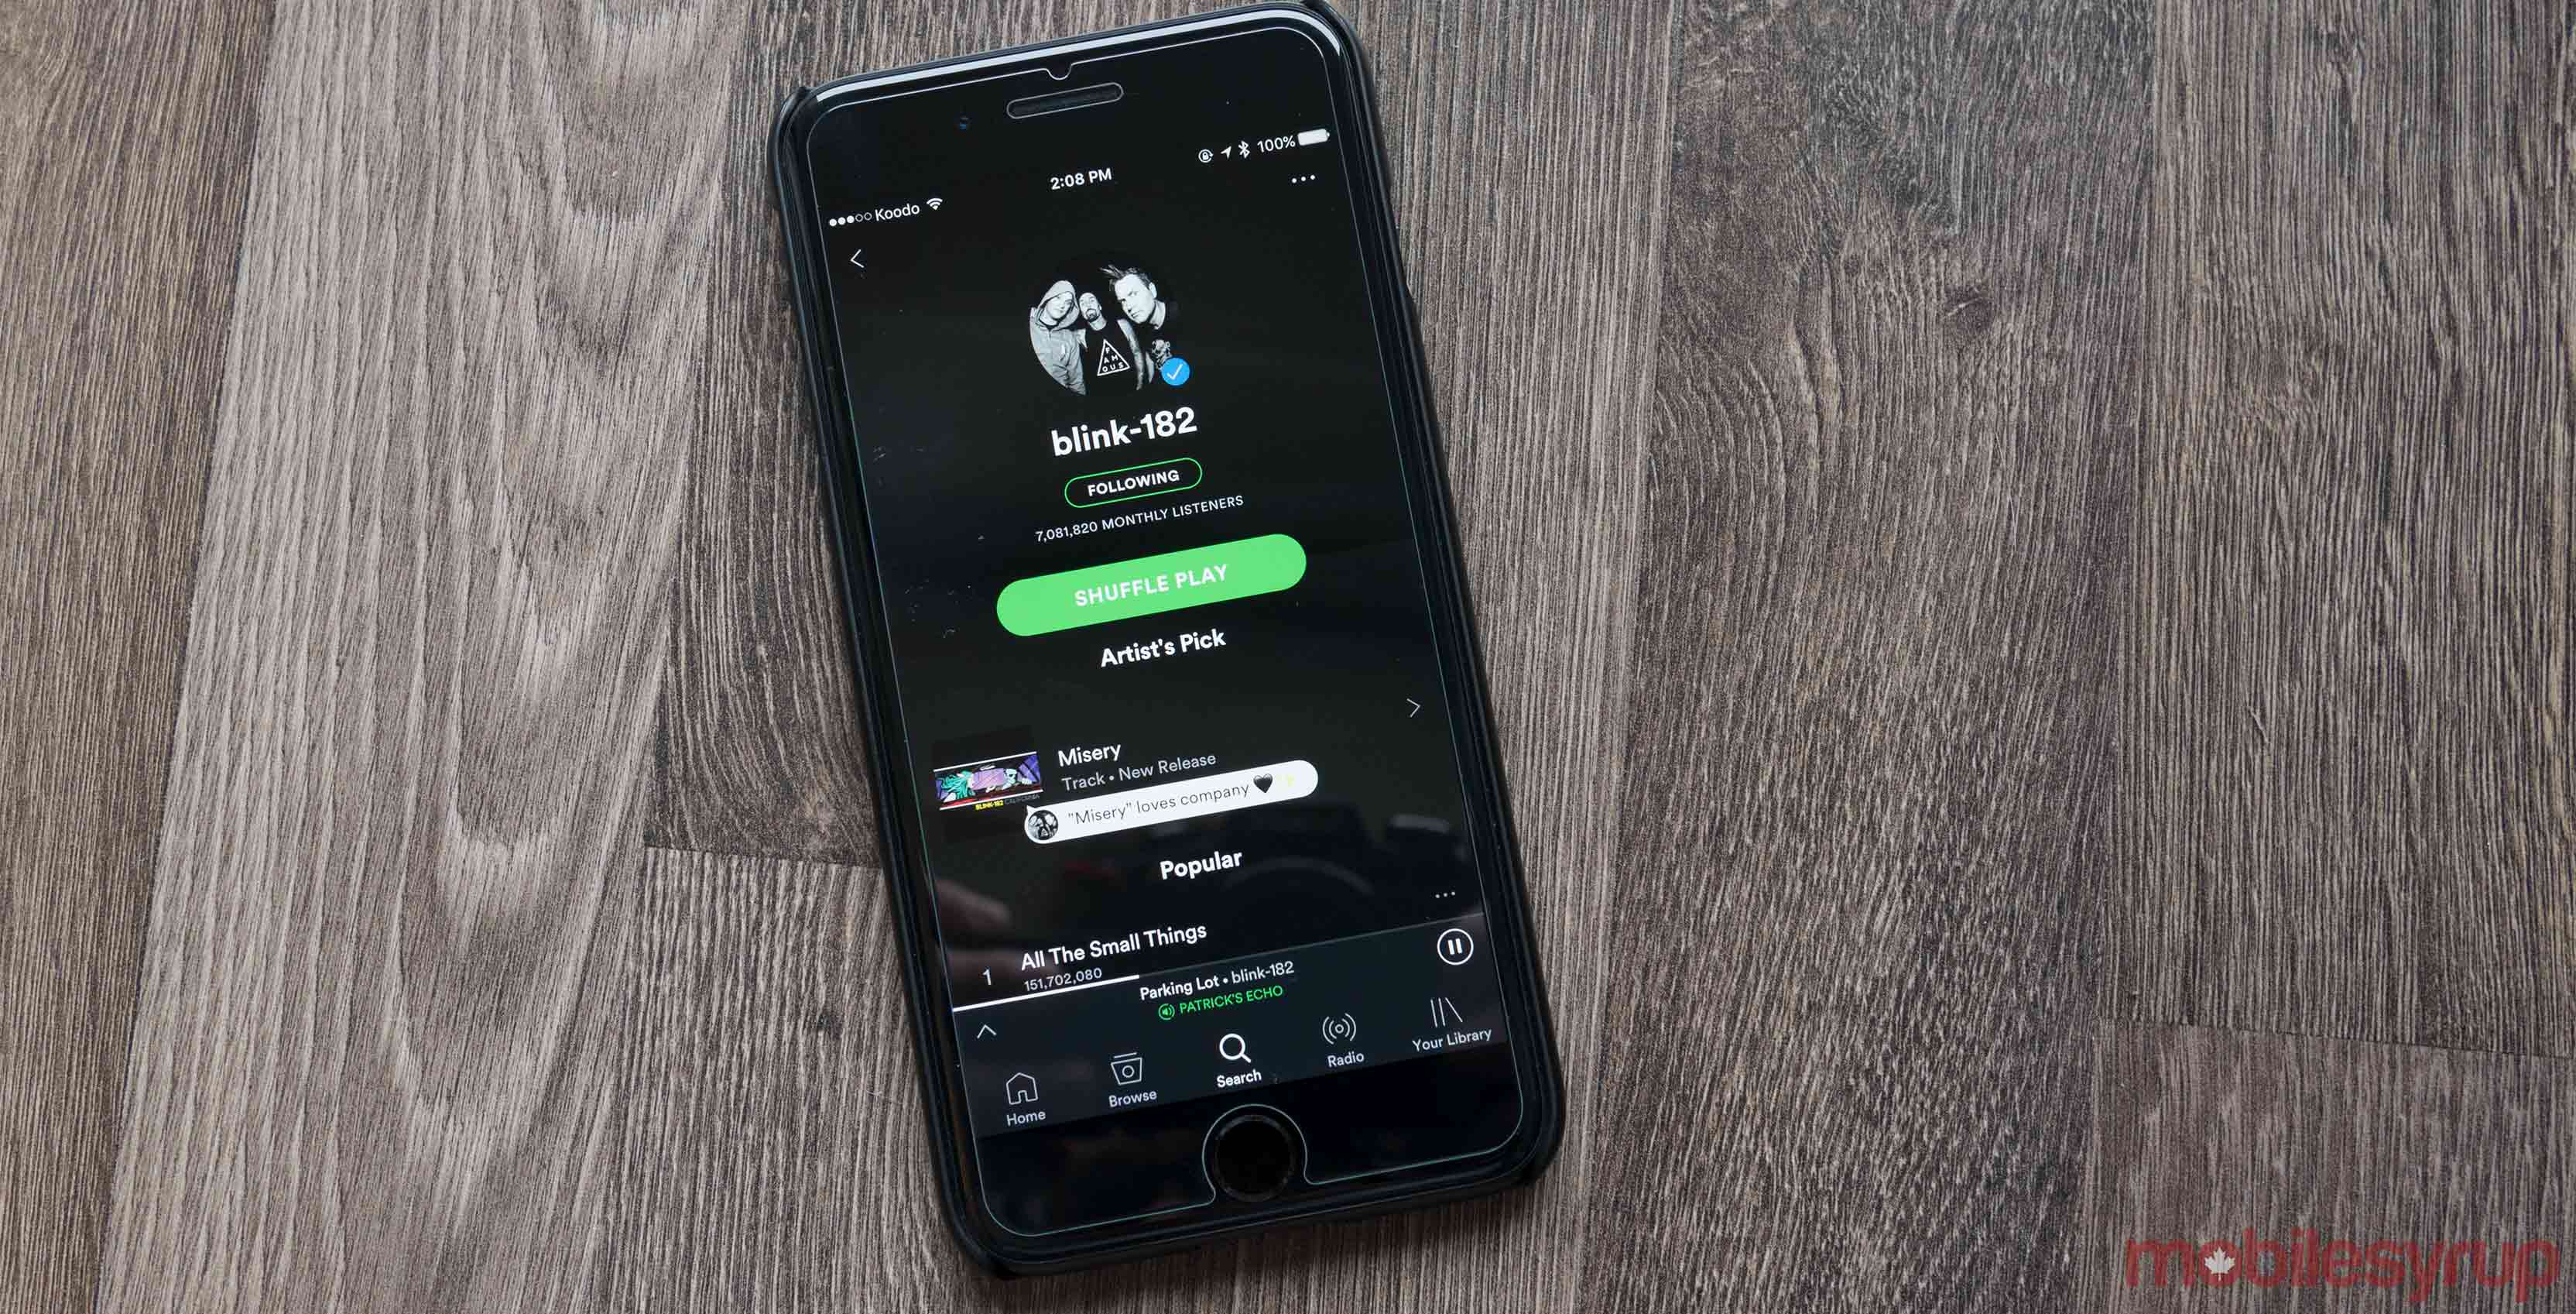 Spotify on an iPhone 7 Plus